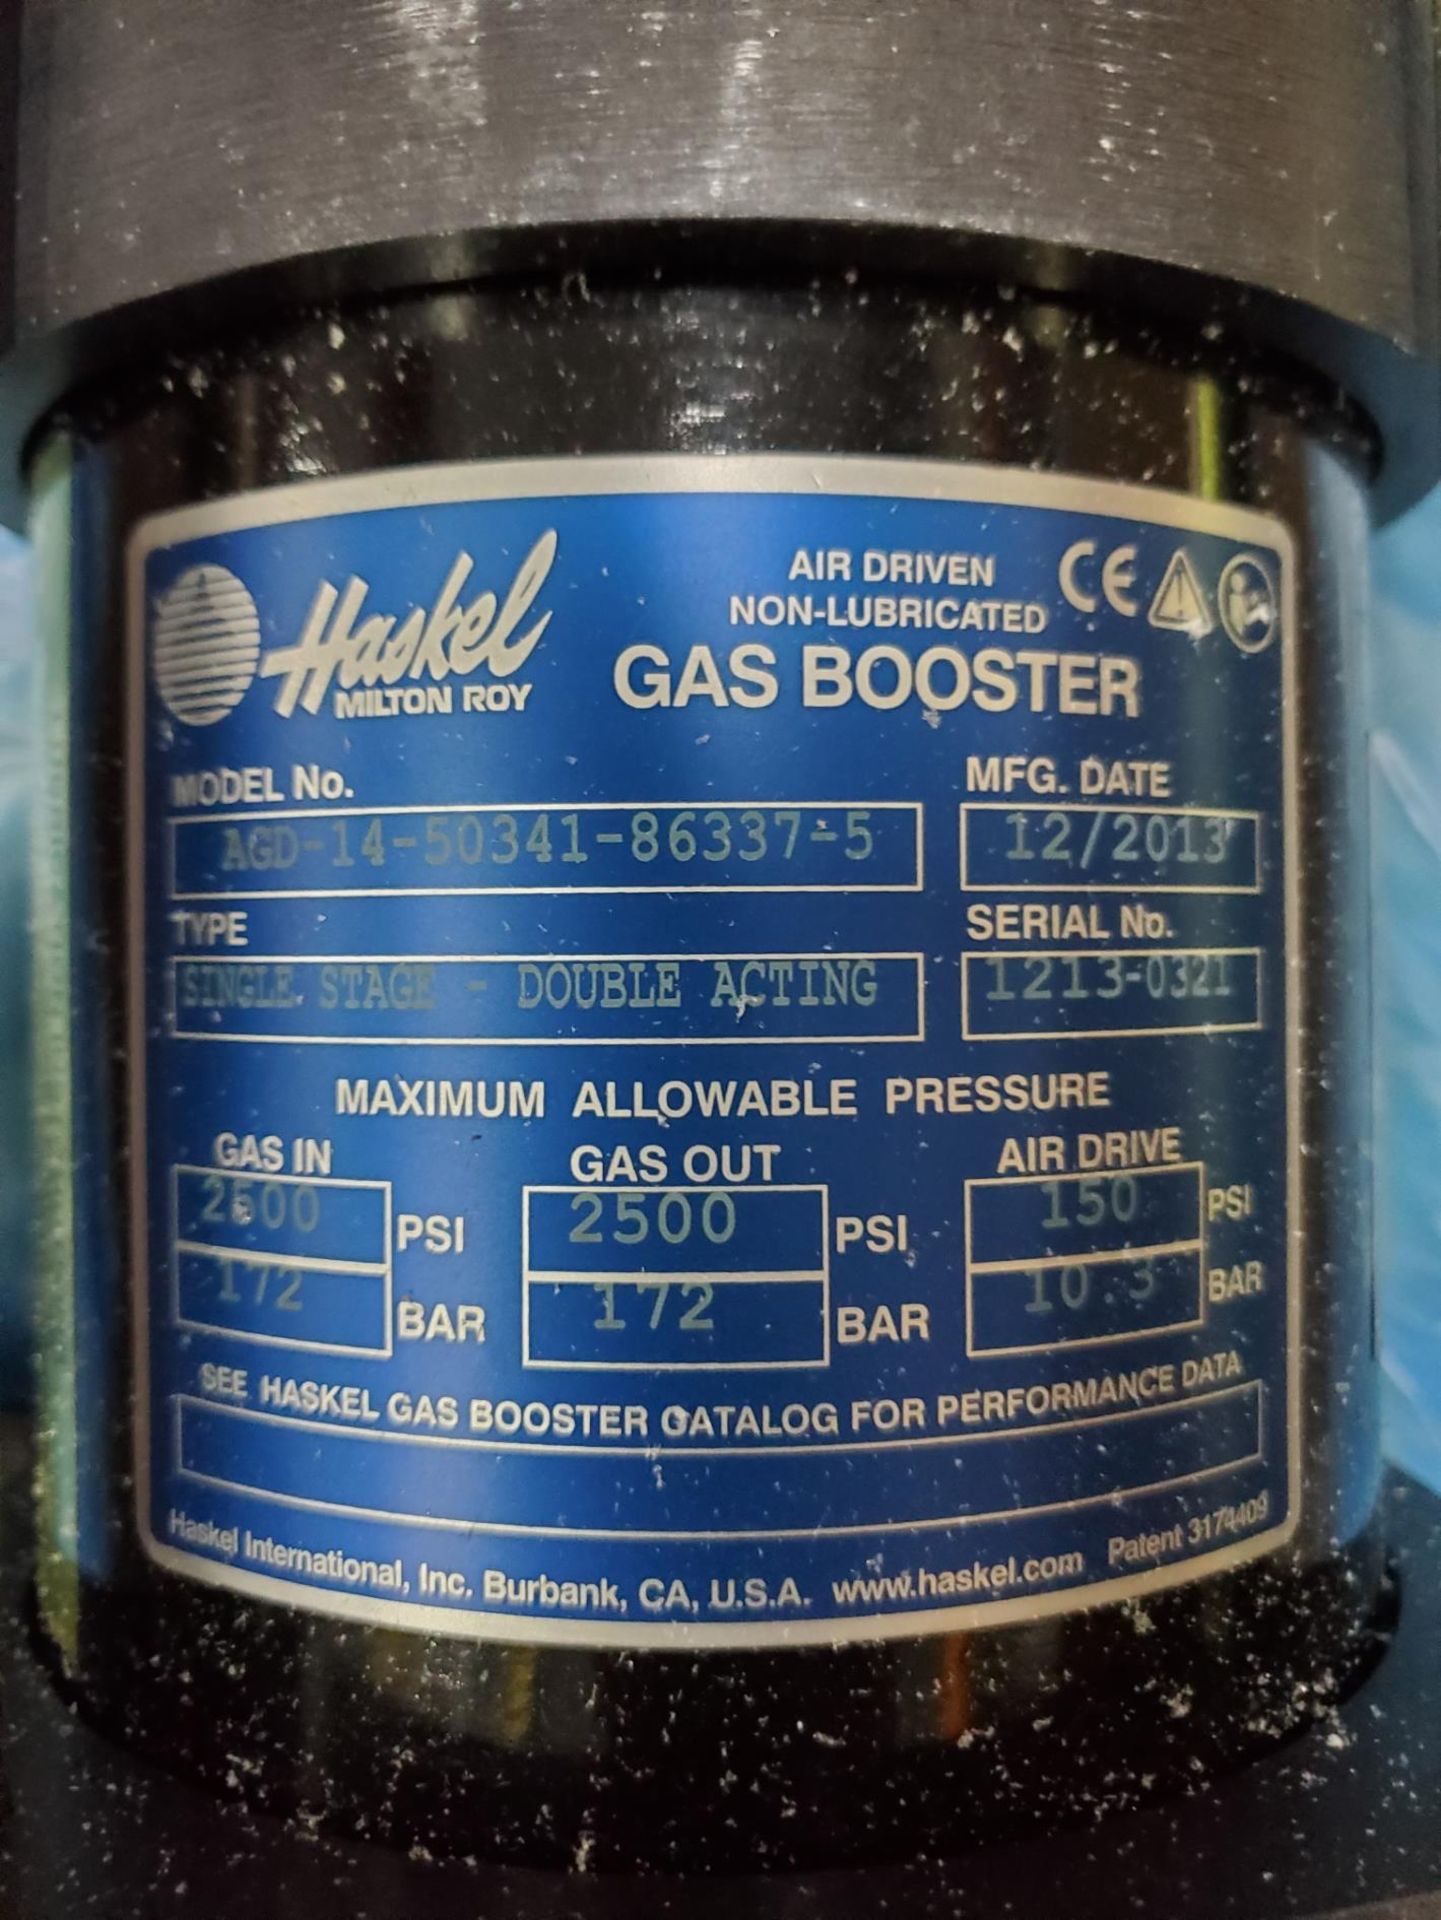 Lot of (2) New/ Never Used Haskel Gas Boosters. Model AGD-14-50341-86337-5. - Image 3 of 5